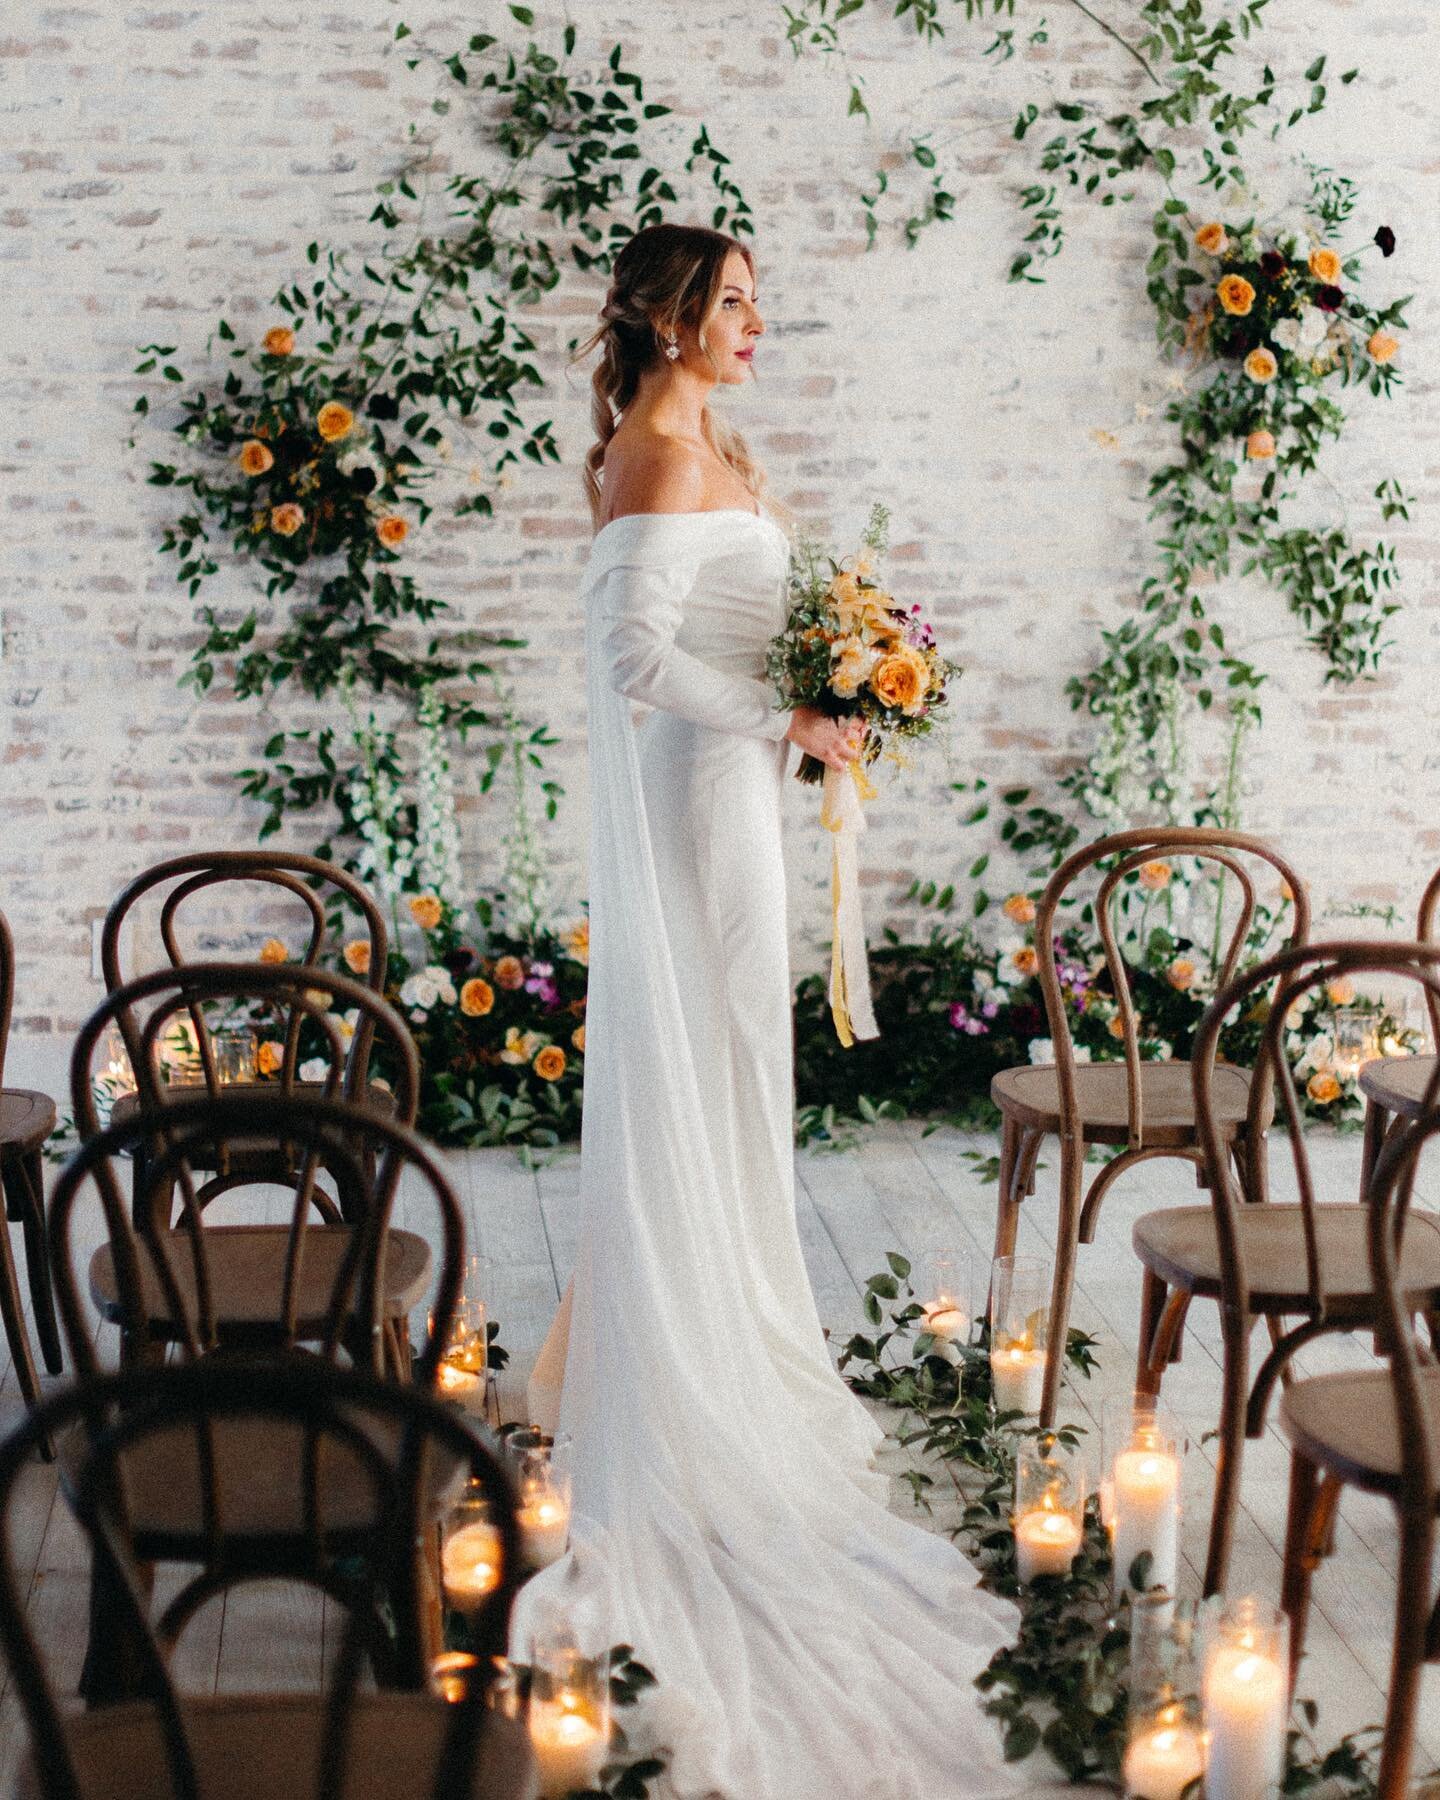 Got the full gallery yesterday for this stunning winter wedding shoot!

We love the way our winter wedding dream team set this simple, elegant beauty of a ceremony! 

Special thanks to @lae.event.floral for her execution, @ivoryandsageevents for drea